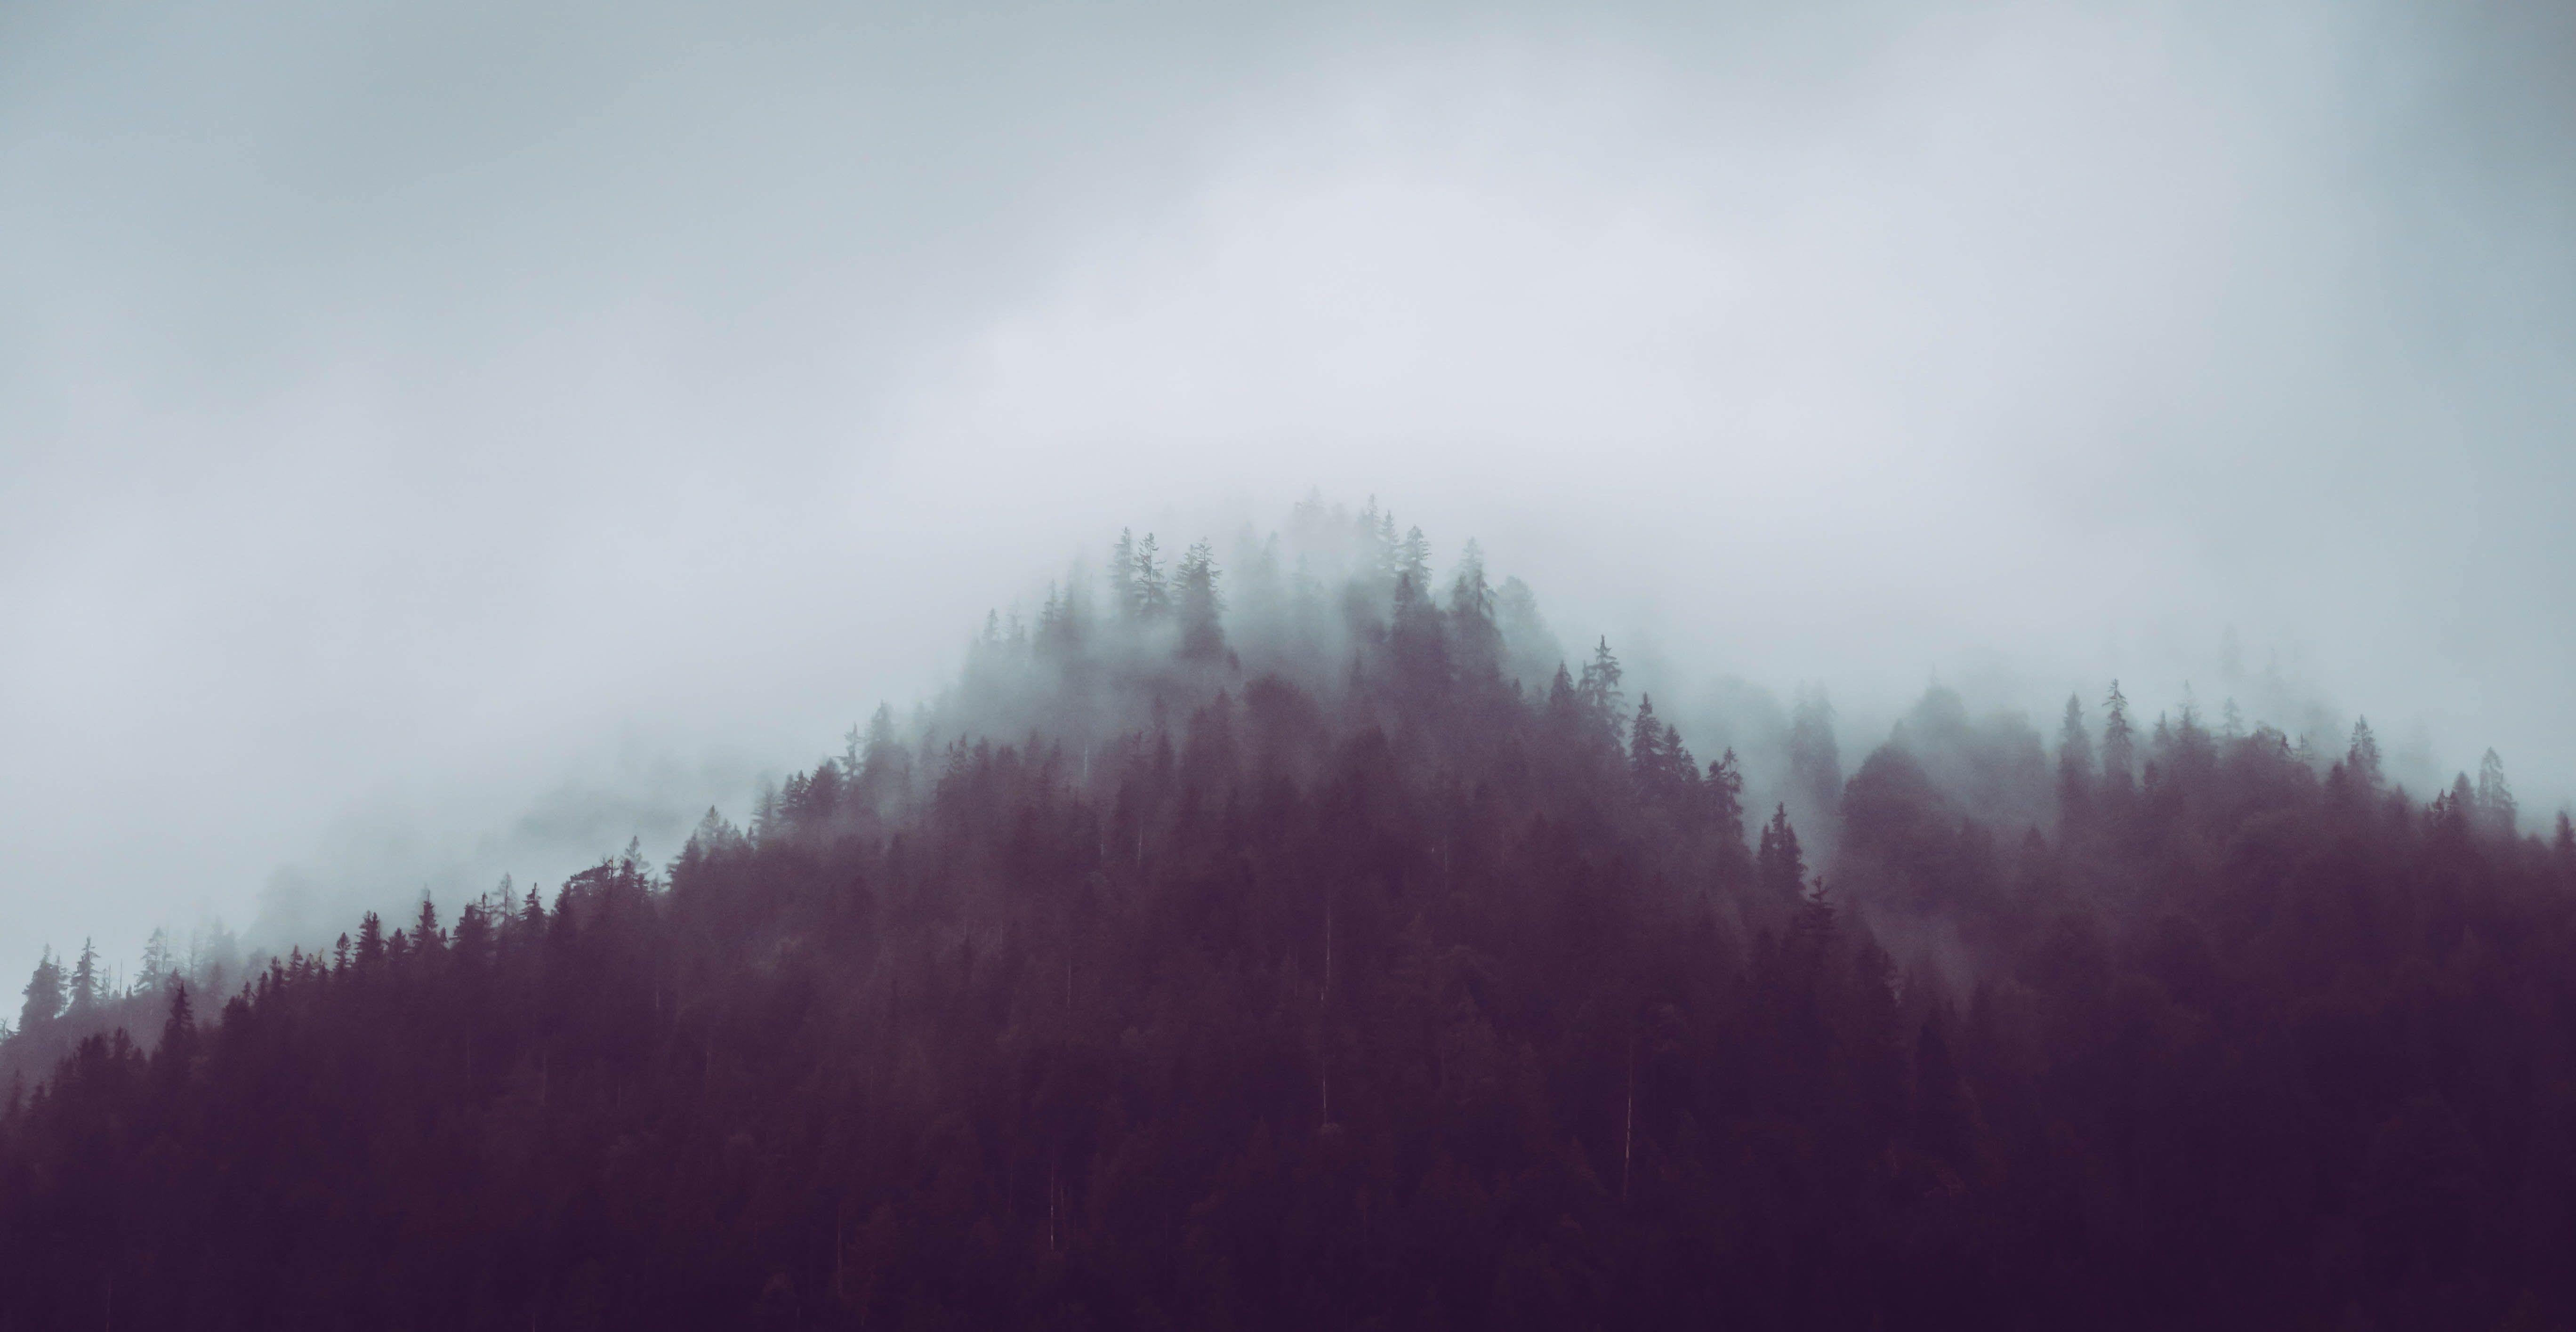 5472x2830 PNG image, layears, landscape, fog, forest, landscape layers, nature, panoramica, hillside, mist, foggy, mistycal, lonely, stormy, cloud, tree, woodland, adventure, mountain, white, storm Gallery HD Wallpaper